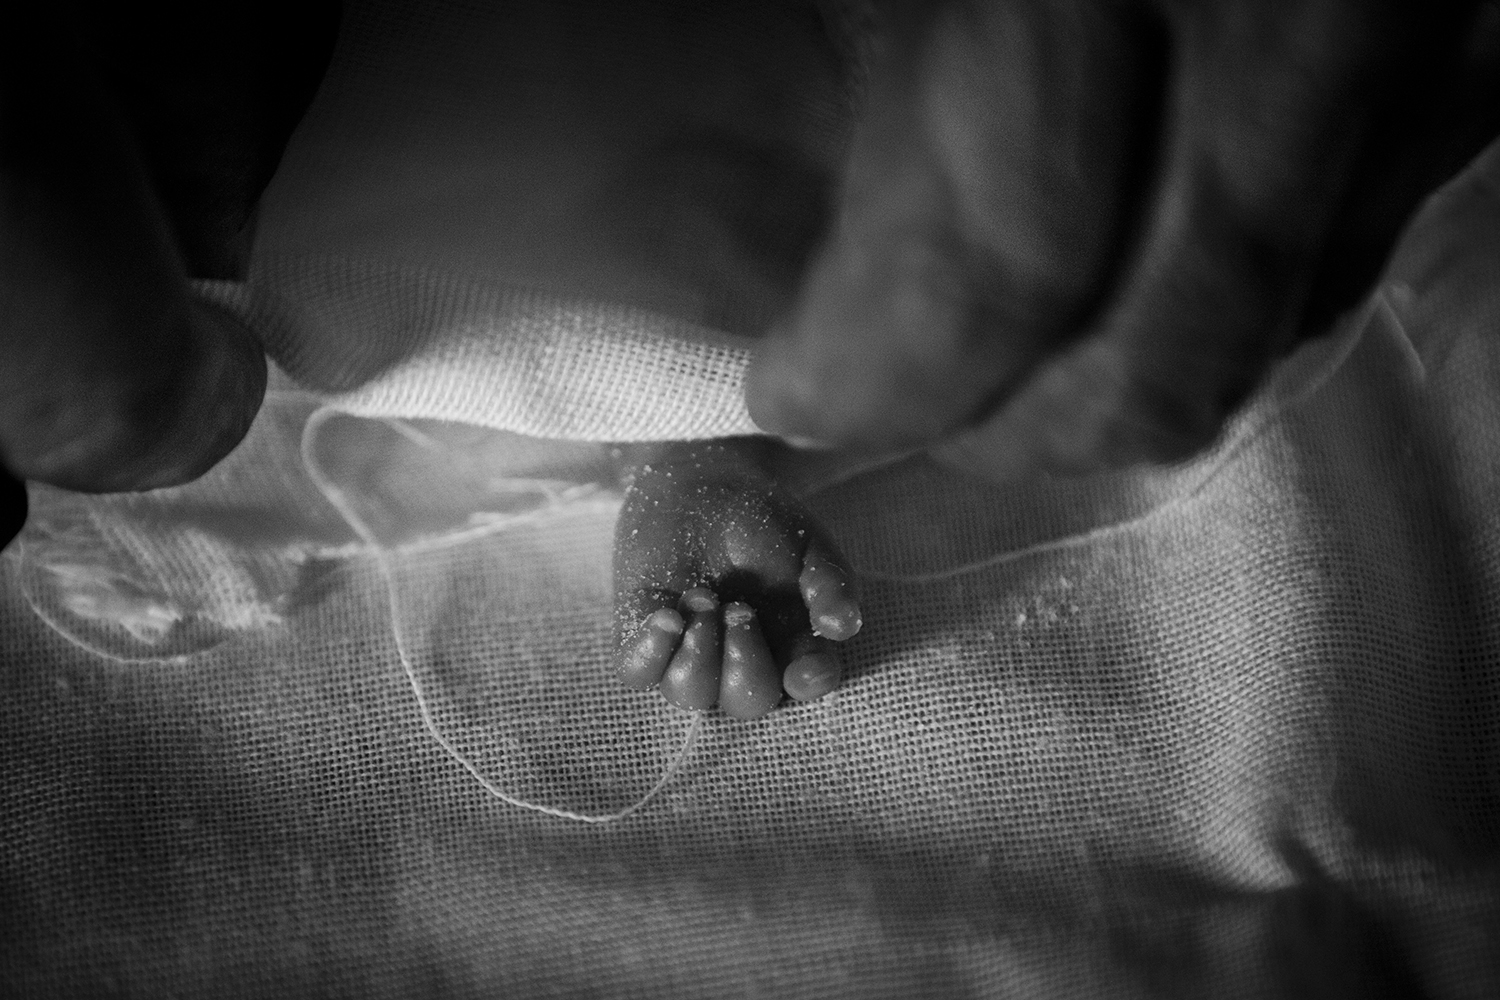 Apr. 22, 2012. Basra. The hand of a stillborn baby is wrapped in linen cloth.